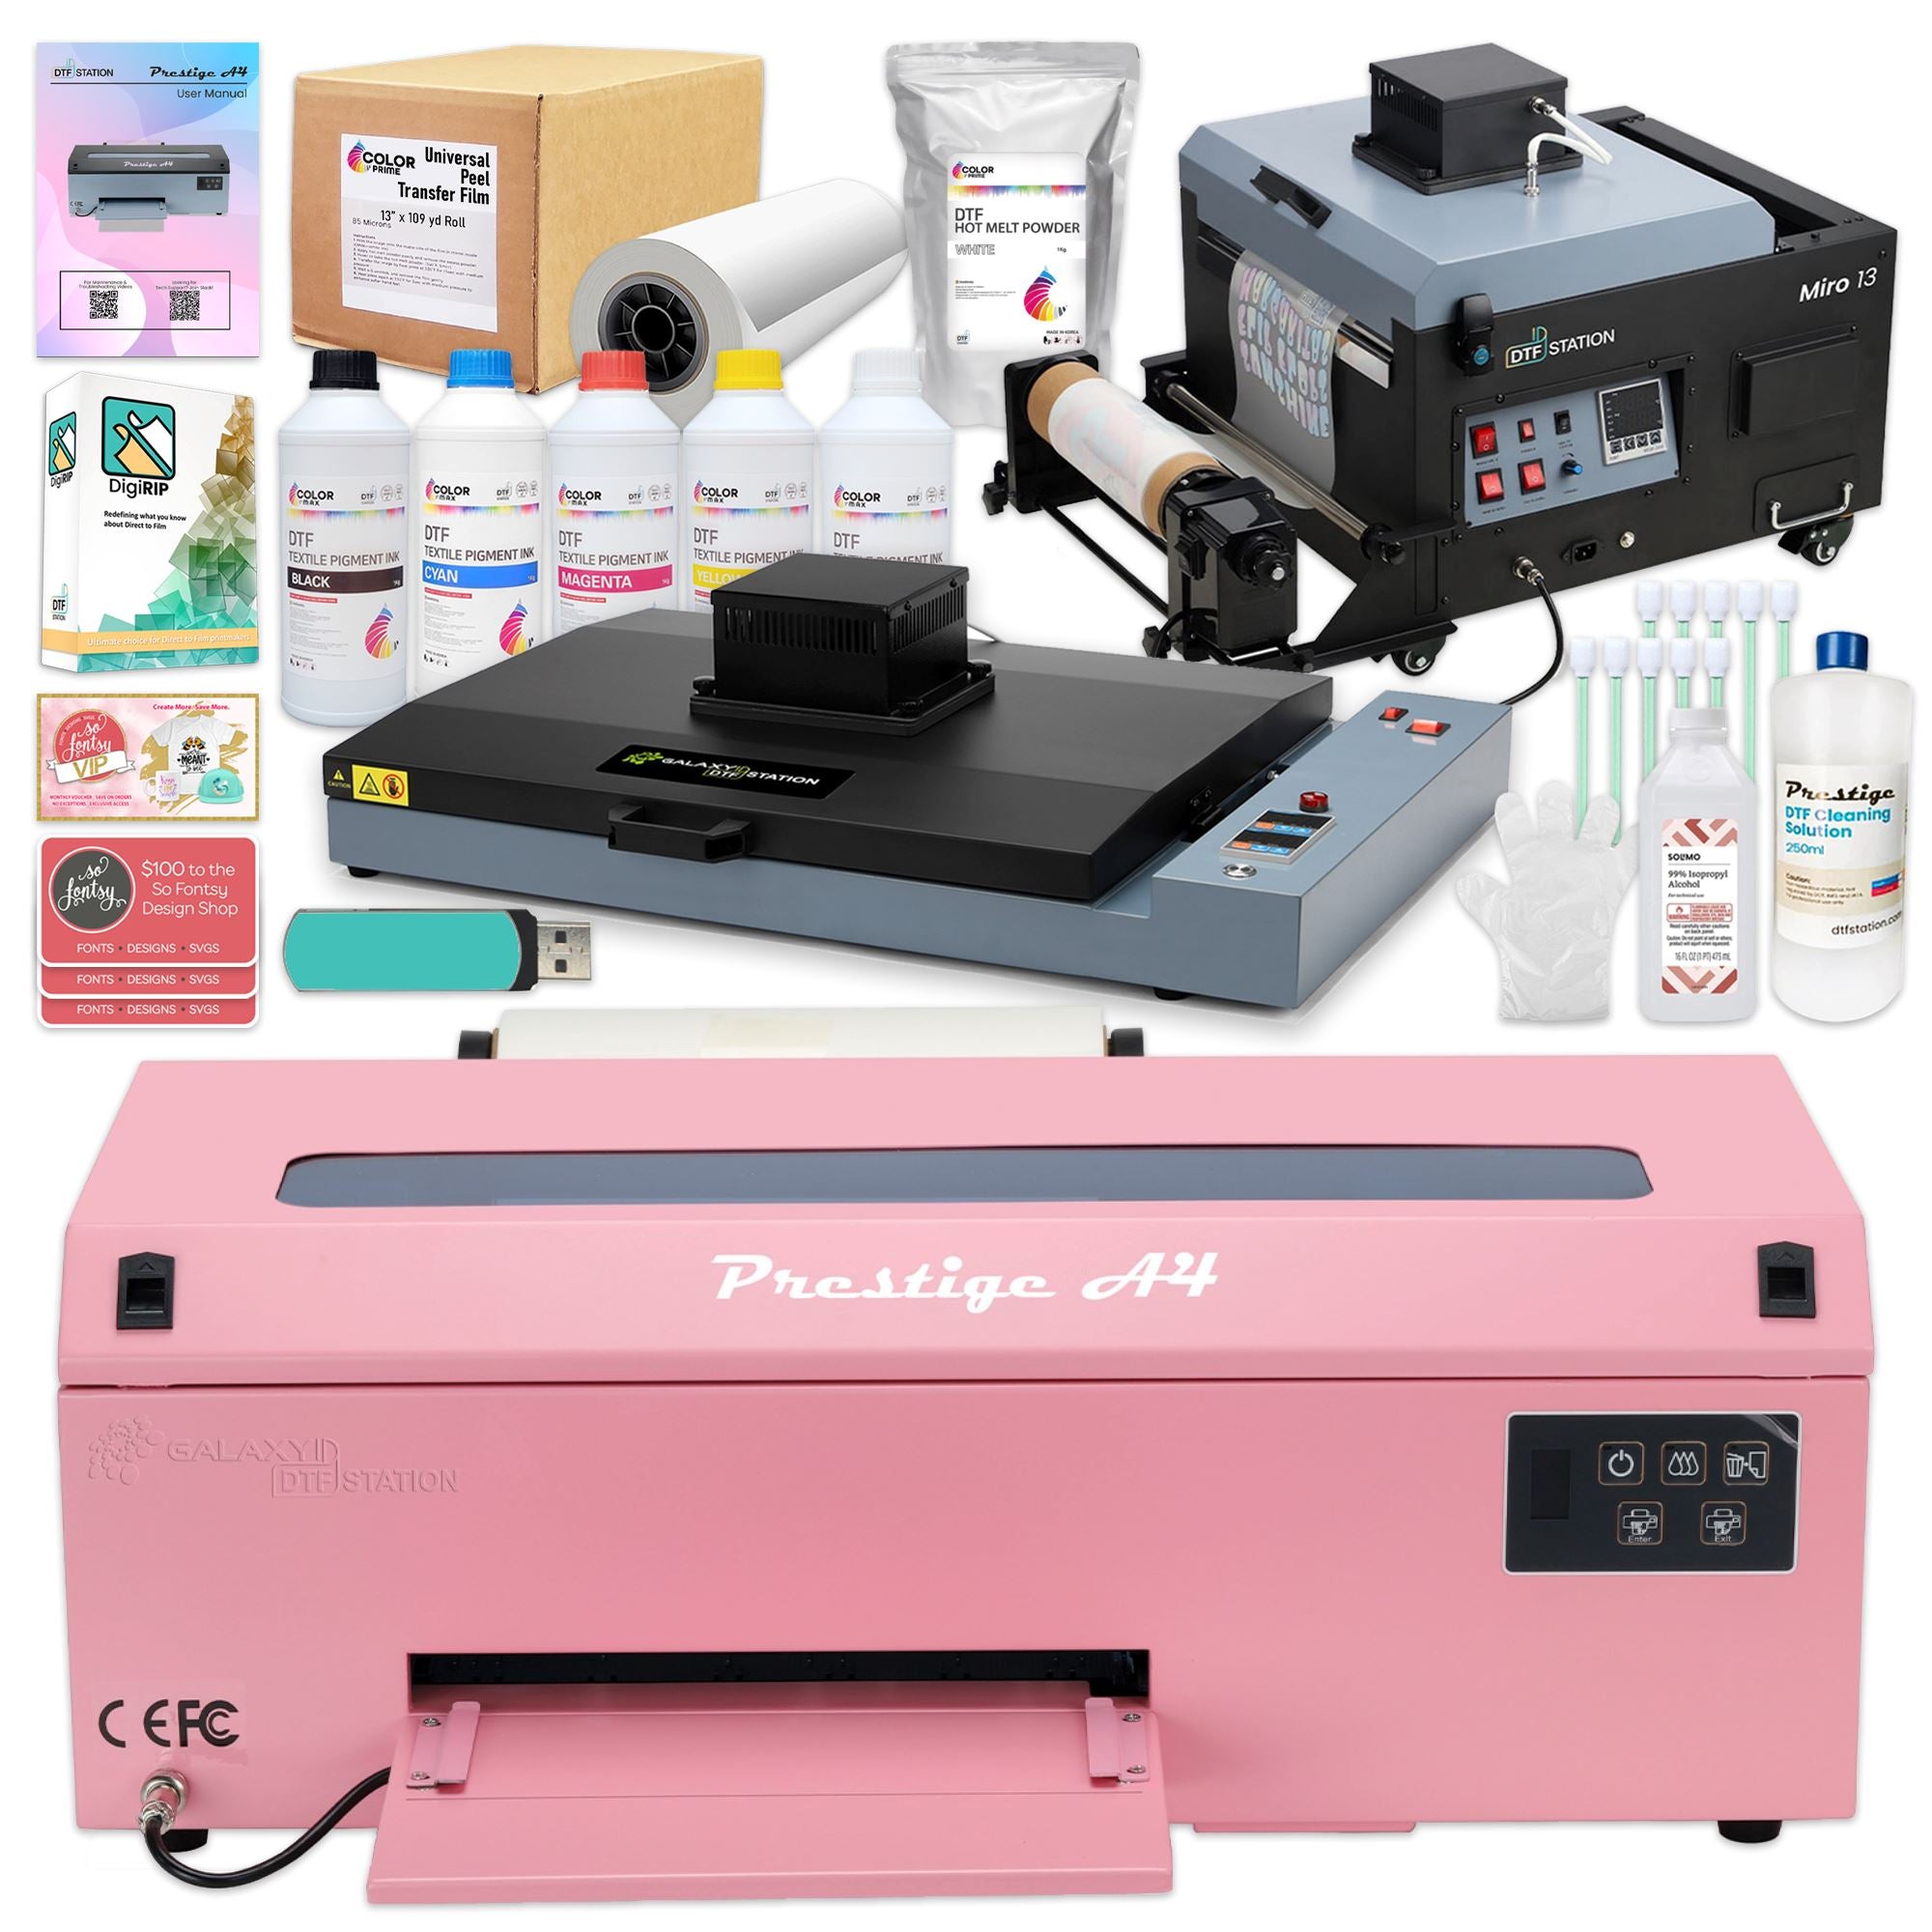 Xanté Sets Price and Ship Date for Its New Direct-to-Film Printer - Xanté